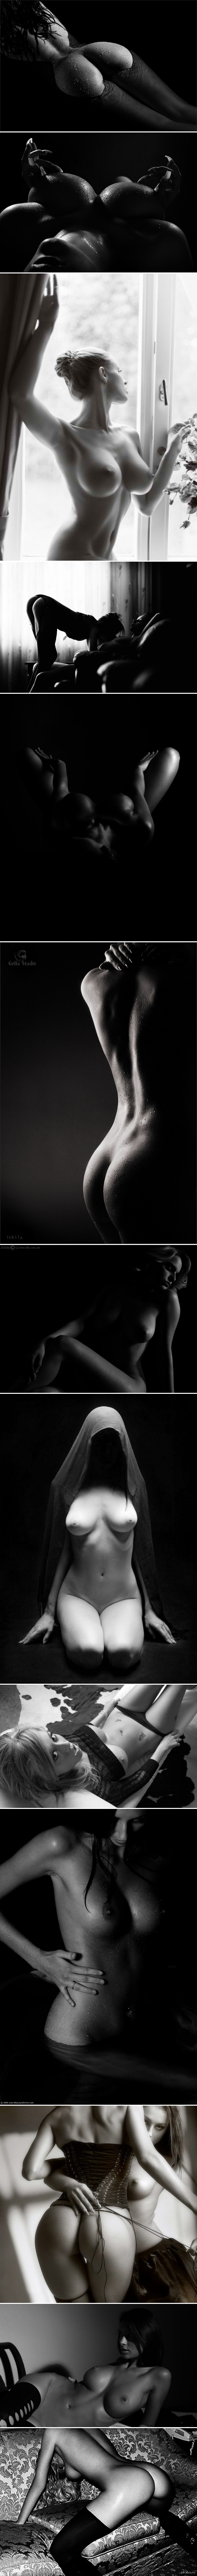 A little grey) - NSFW, Girls, Erotic, Black and white, Beautiful view, Longpost